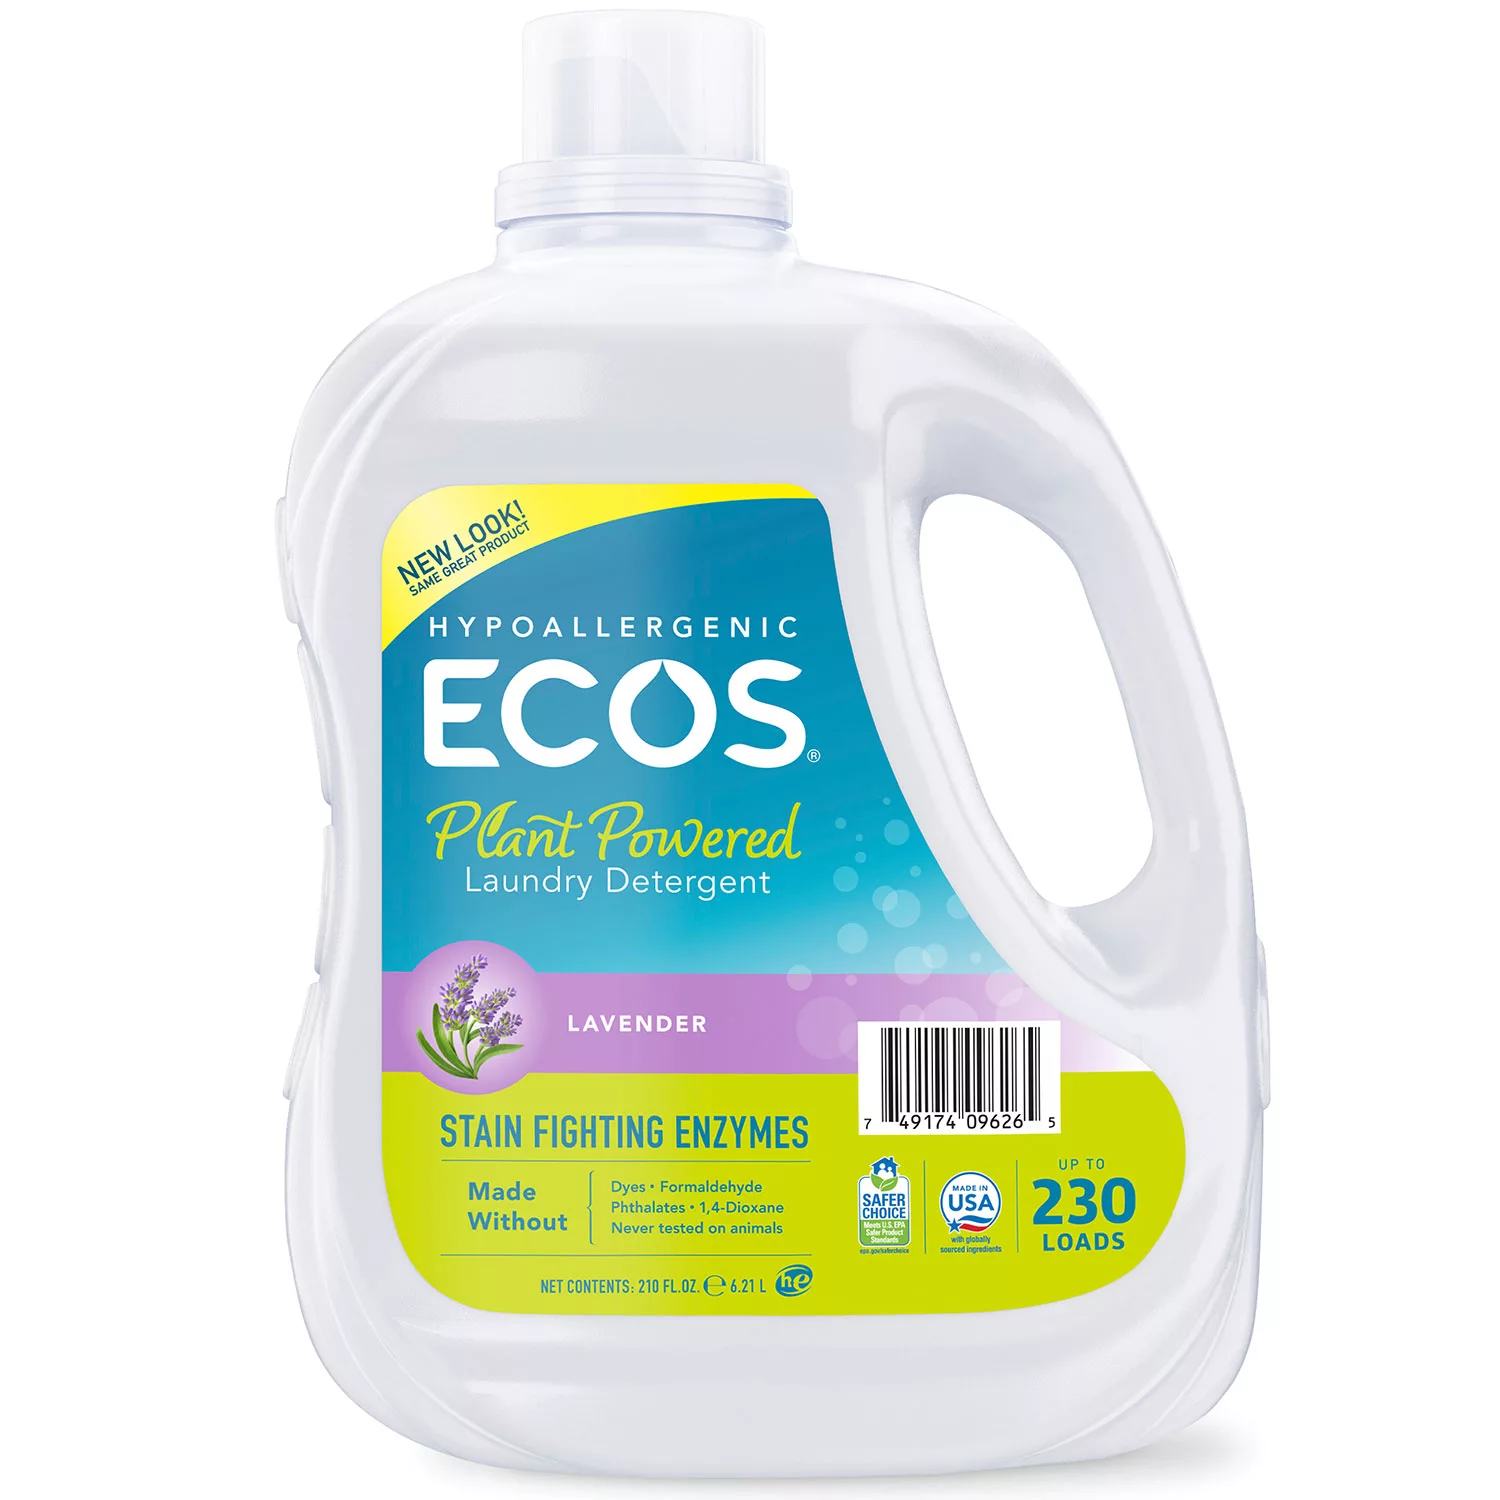 ECOS Plus Stain-Fighting Enzymes Laundry Detergent